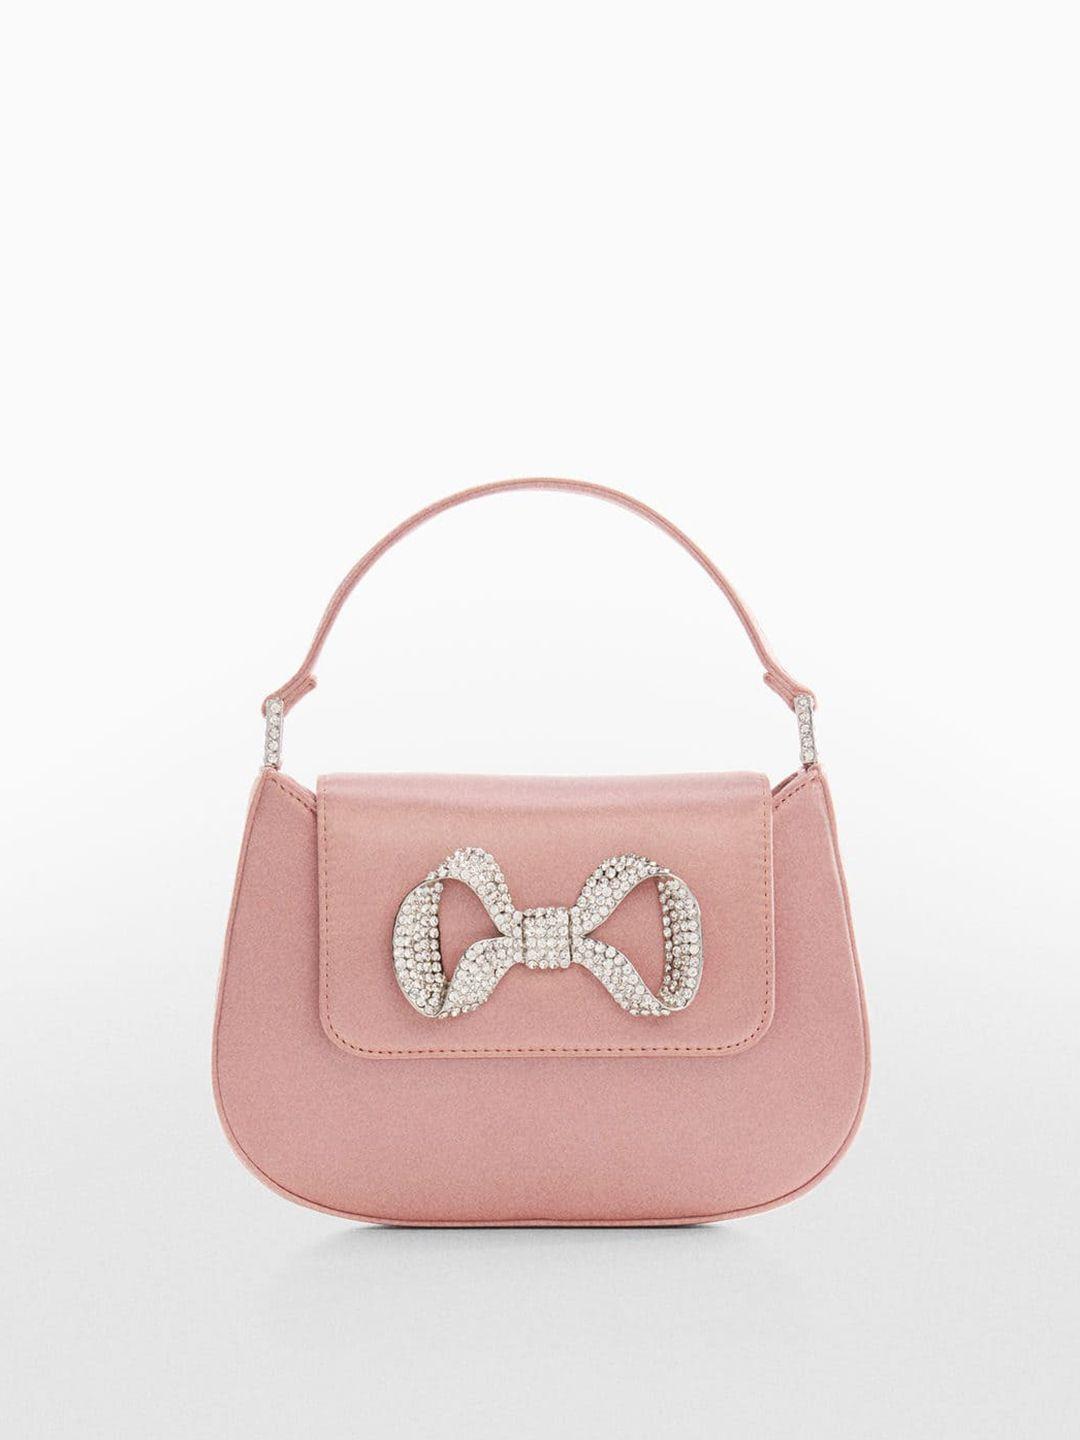 mango embellished structured party satchel bag with bow detail